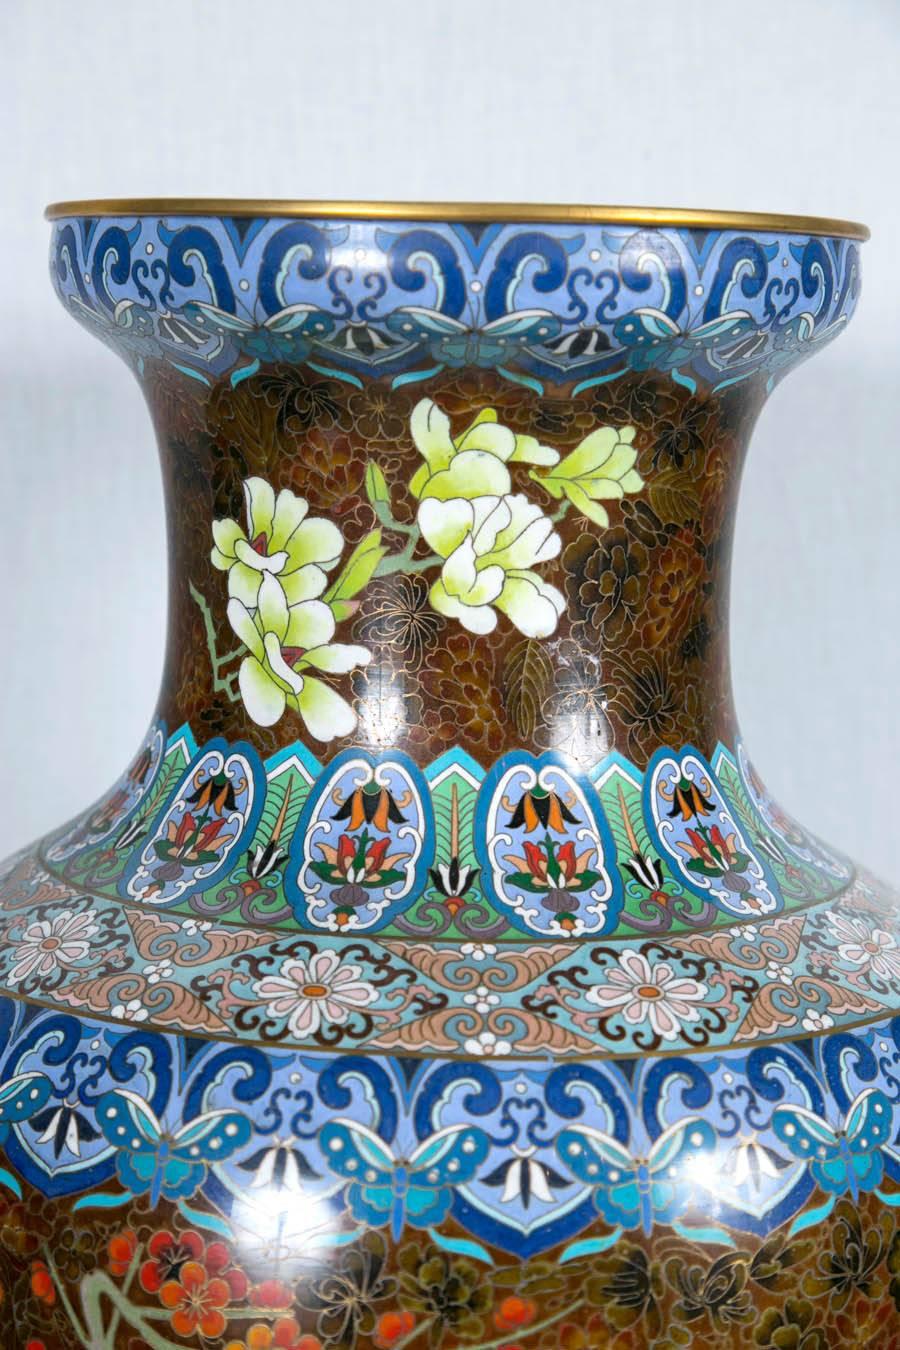 Fully decorated on a gold/brown ground, with flowers, flower pots and Chinese motifs. Brass banded tops and bases.